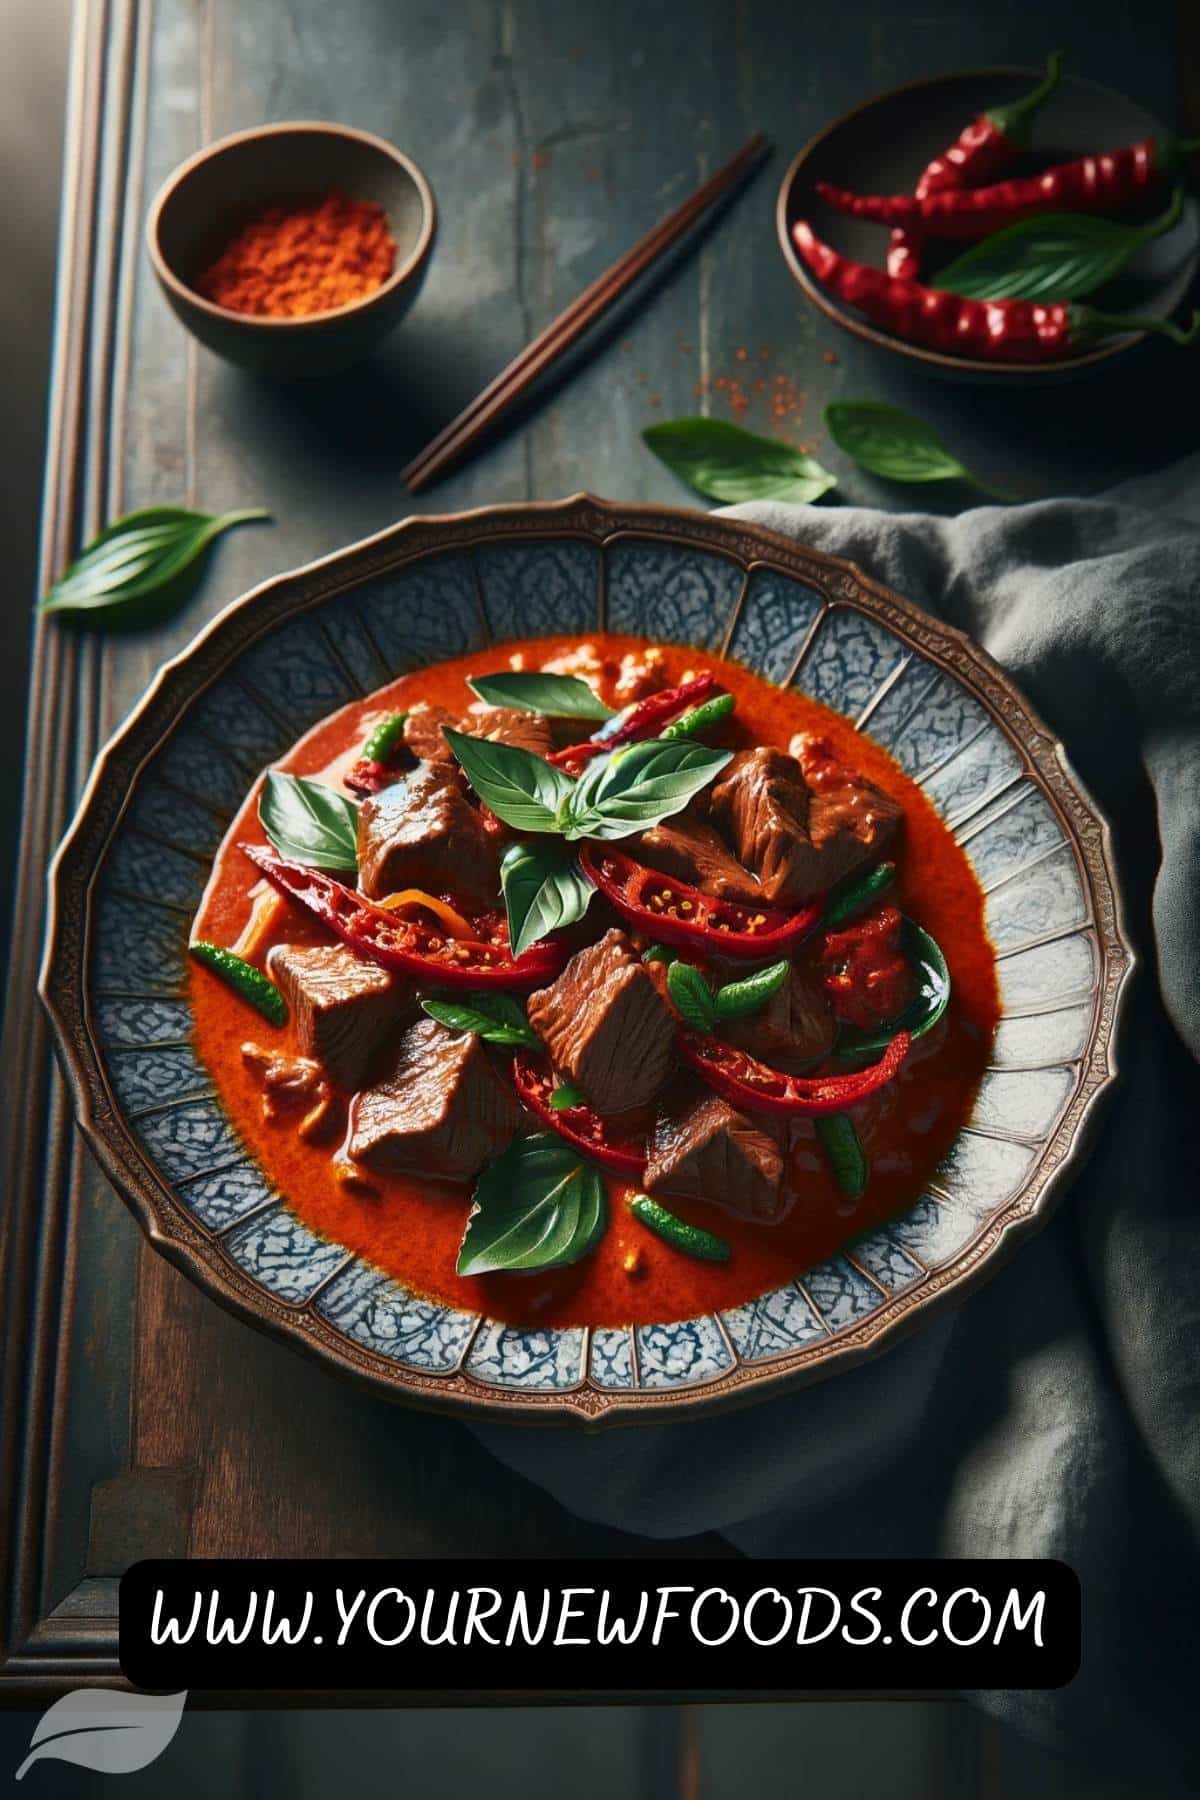 plate of Red Thai Beef Curry. The dish is elegantly presented on a fine porcelain plate, featuring a thick, spicy red curry sauce with chunks of tender beef, garnished with green Thai basil leaves and thin slices of red bell pepper.